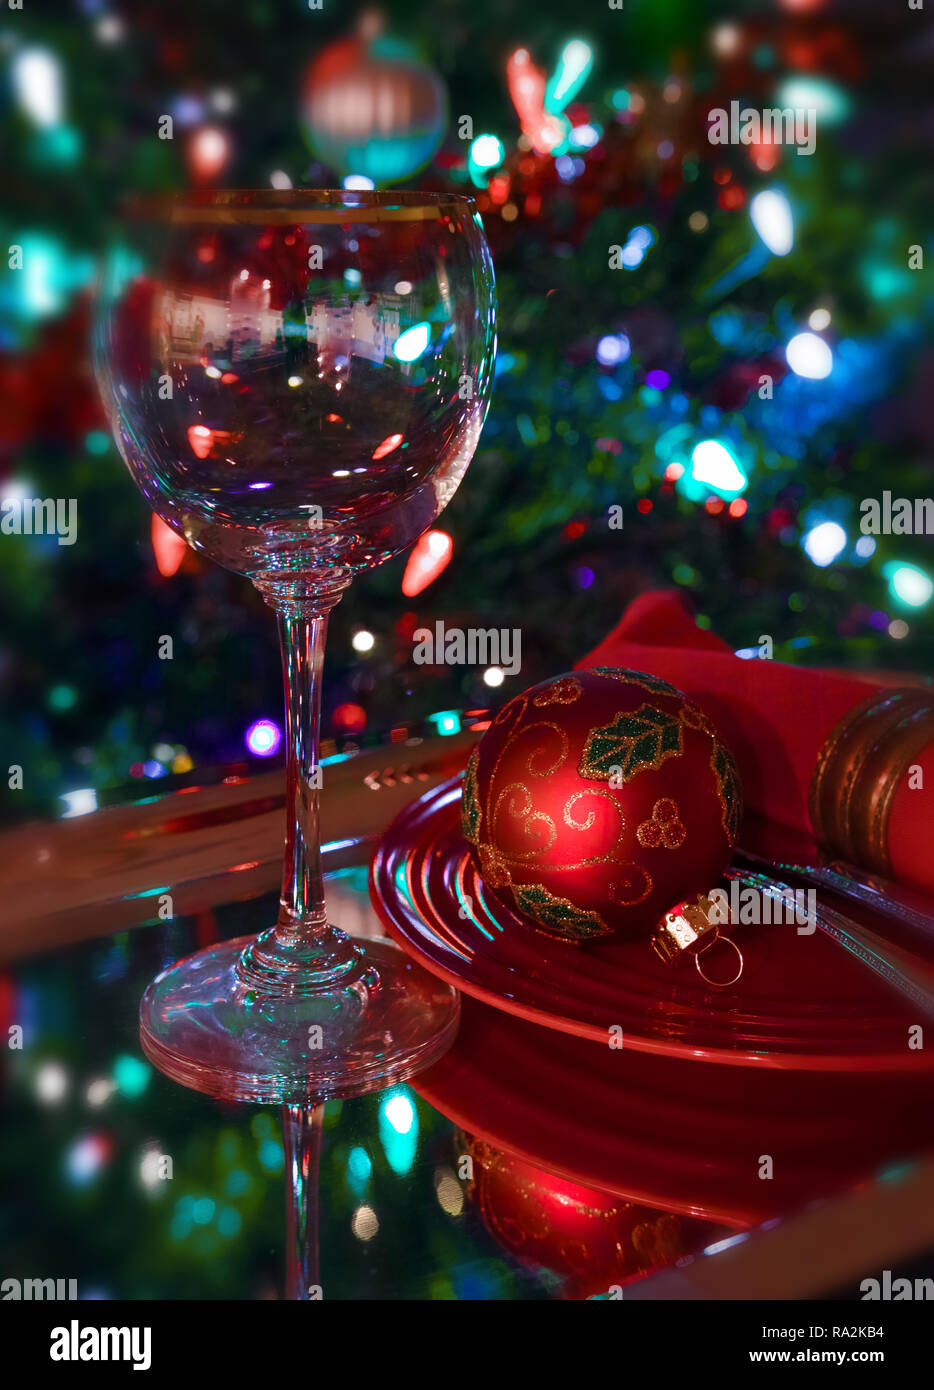 A richly decorated table for the Christmas party or New Year's Eve. Christmas tree in the background. Stock Photo